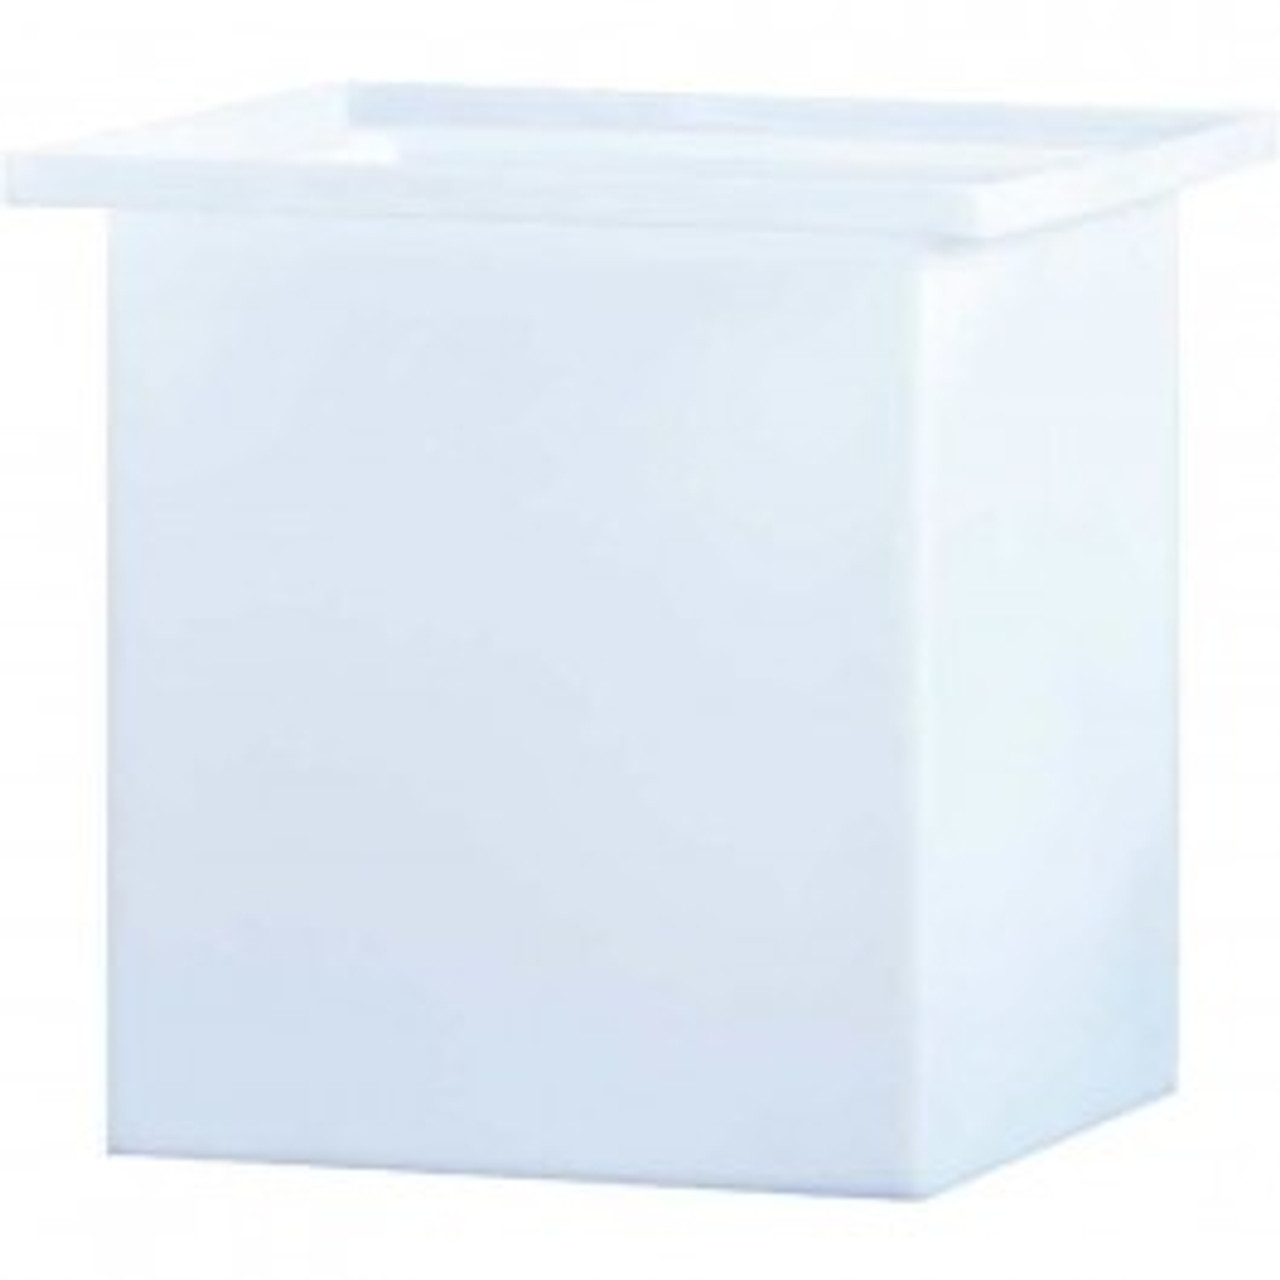 An image of a 17 Gallon PE Chem-Tainer White Rectangular Open Top Tank | R181812A